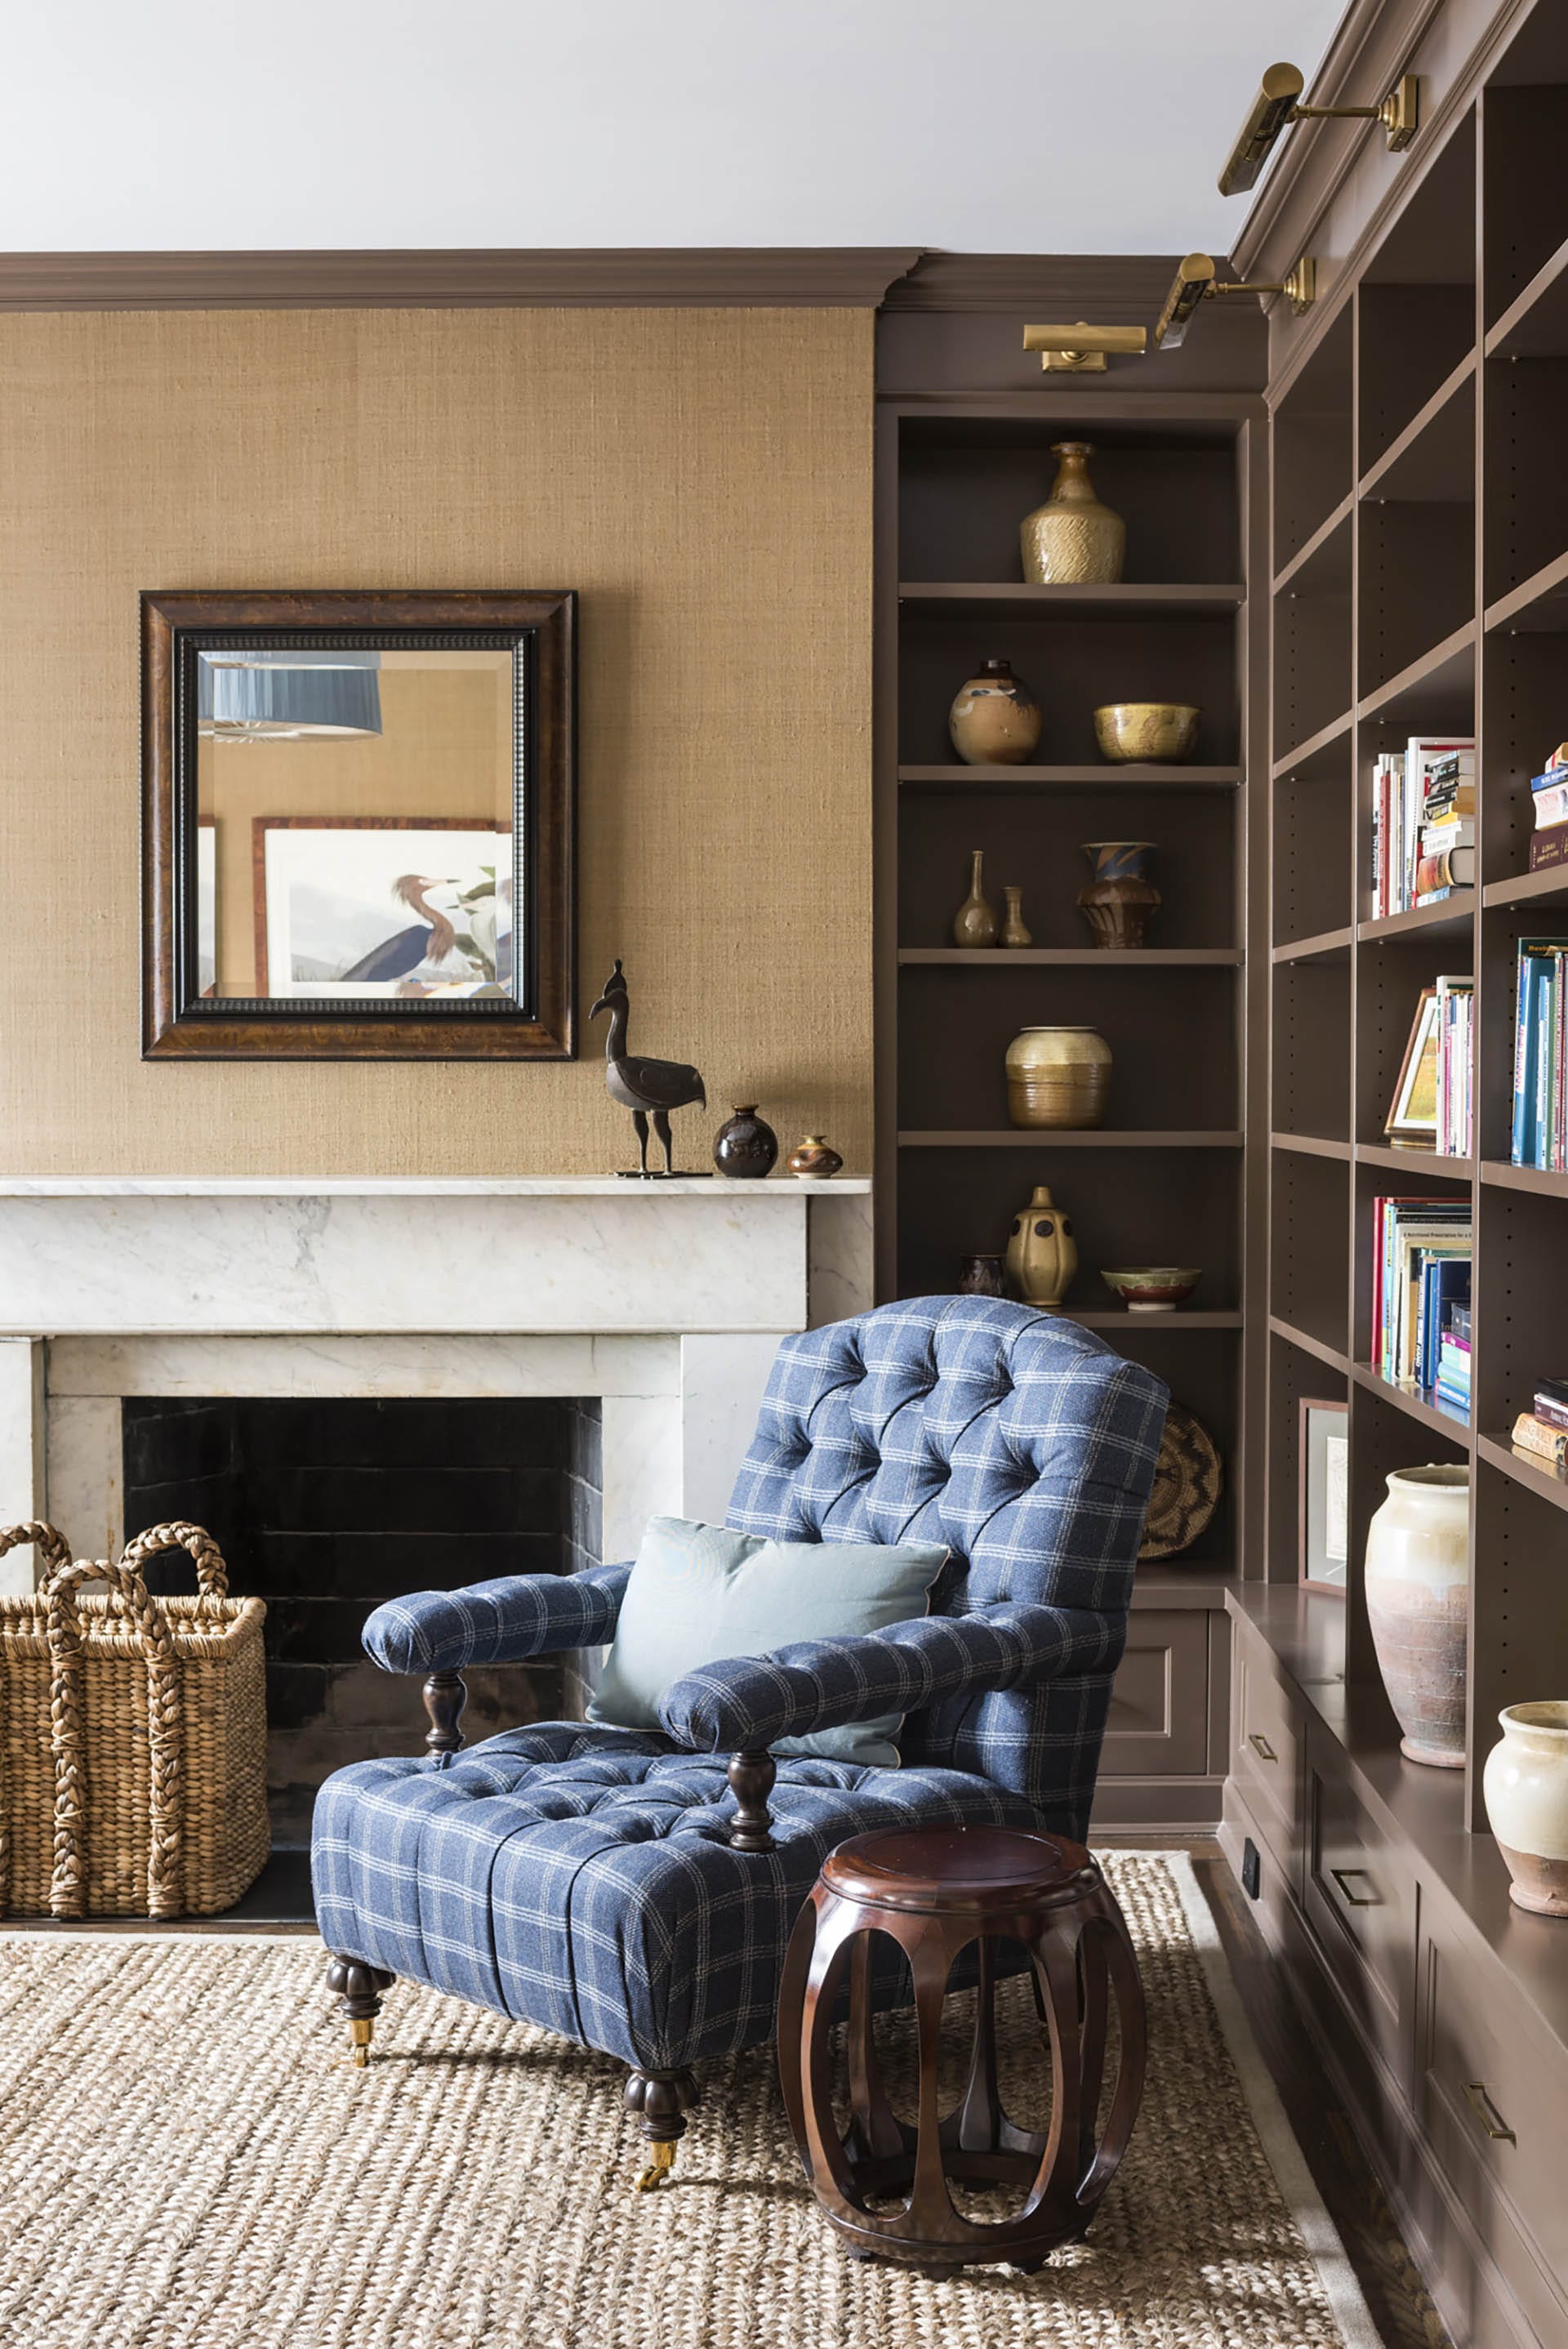 Living room with built-in bookshelves and a blue plaid armchair.